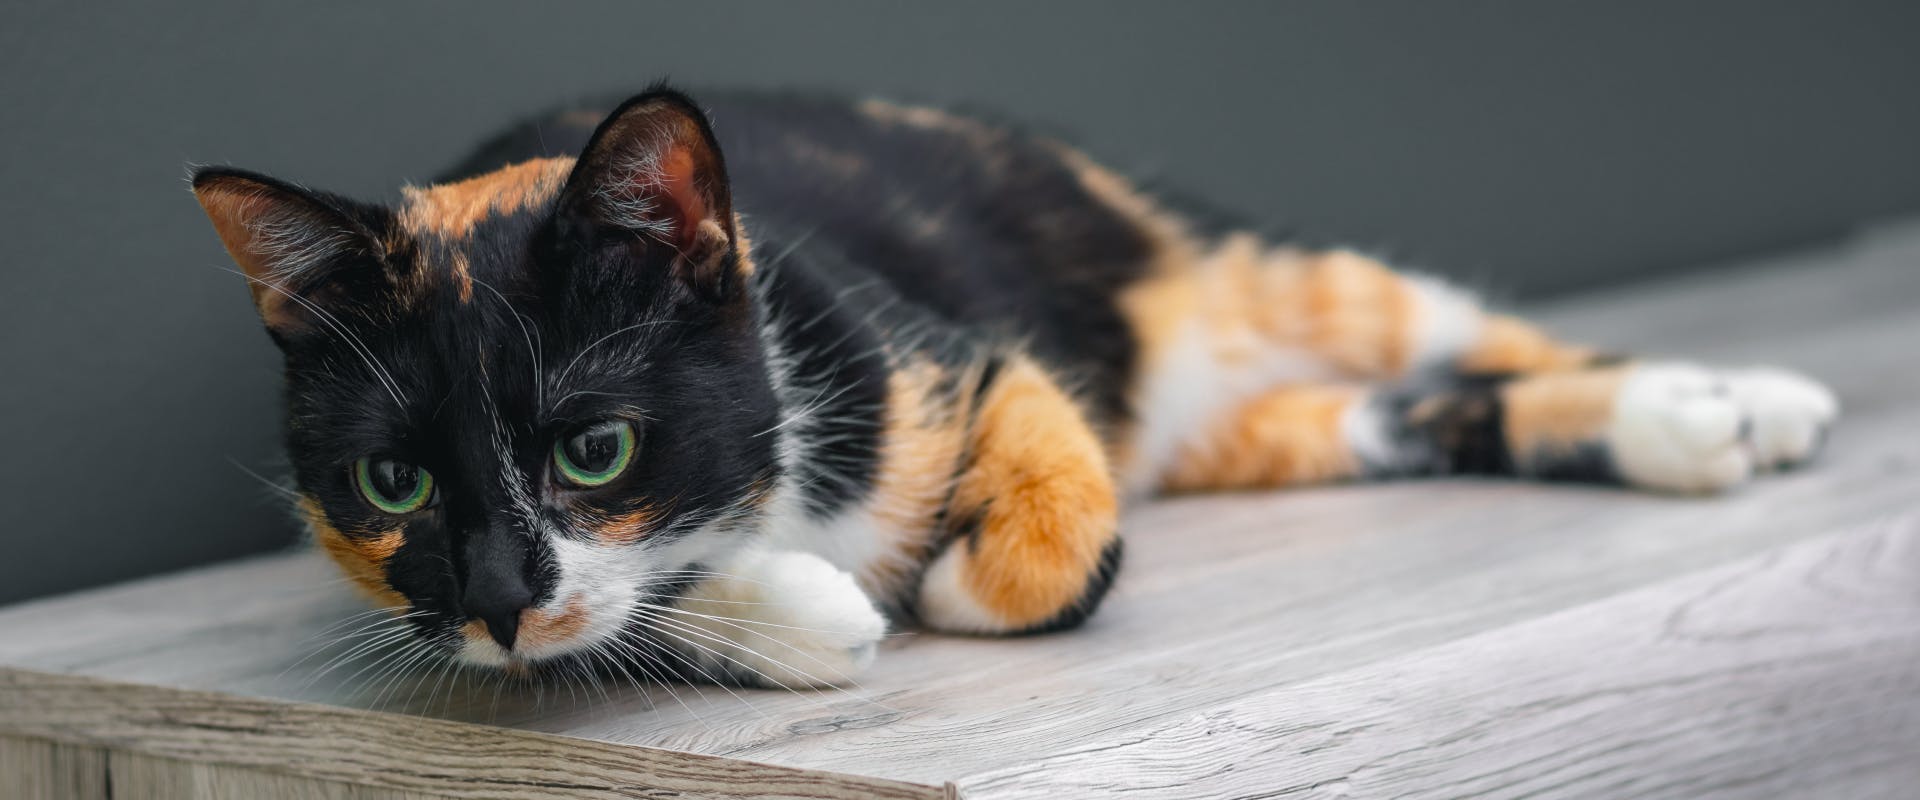 dark calico cat lying on a wooden table